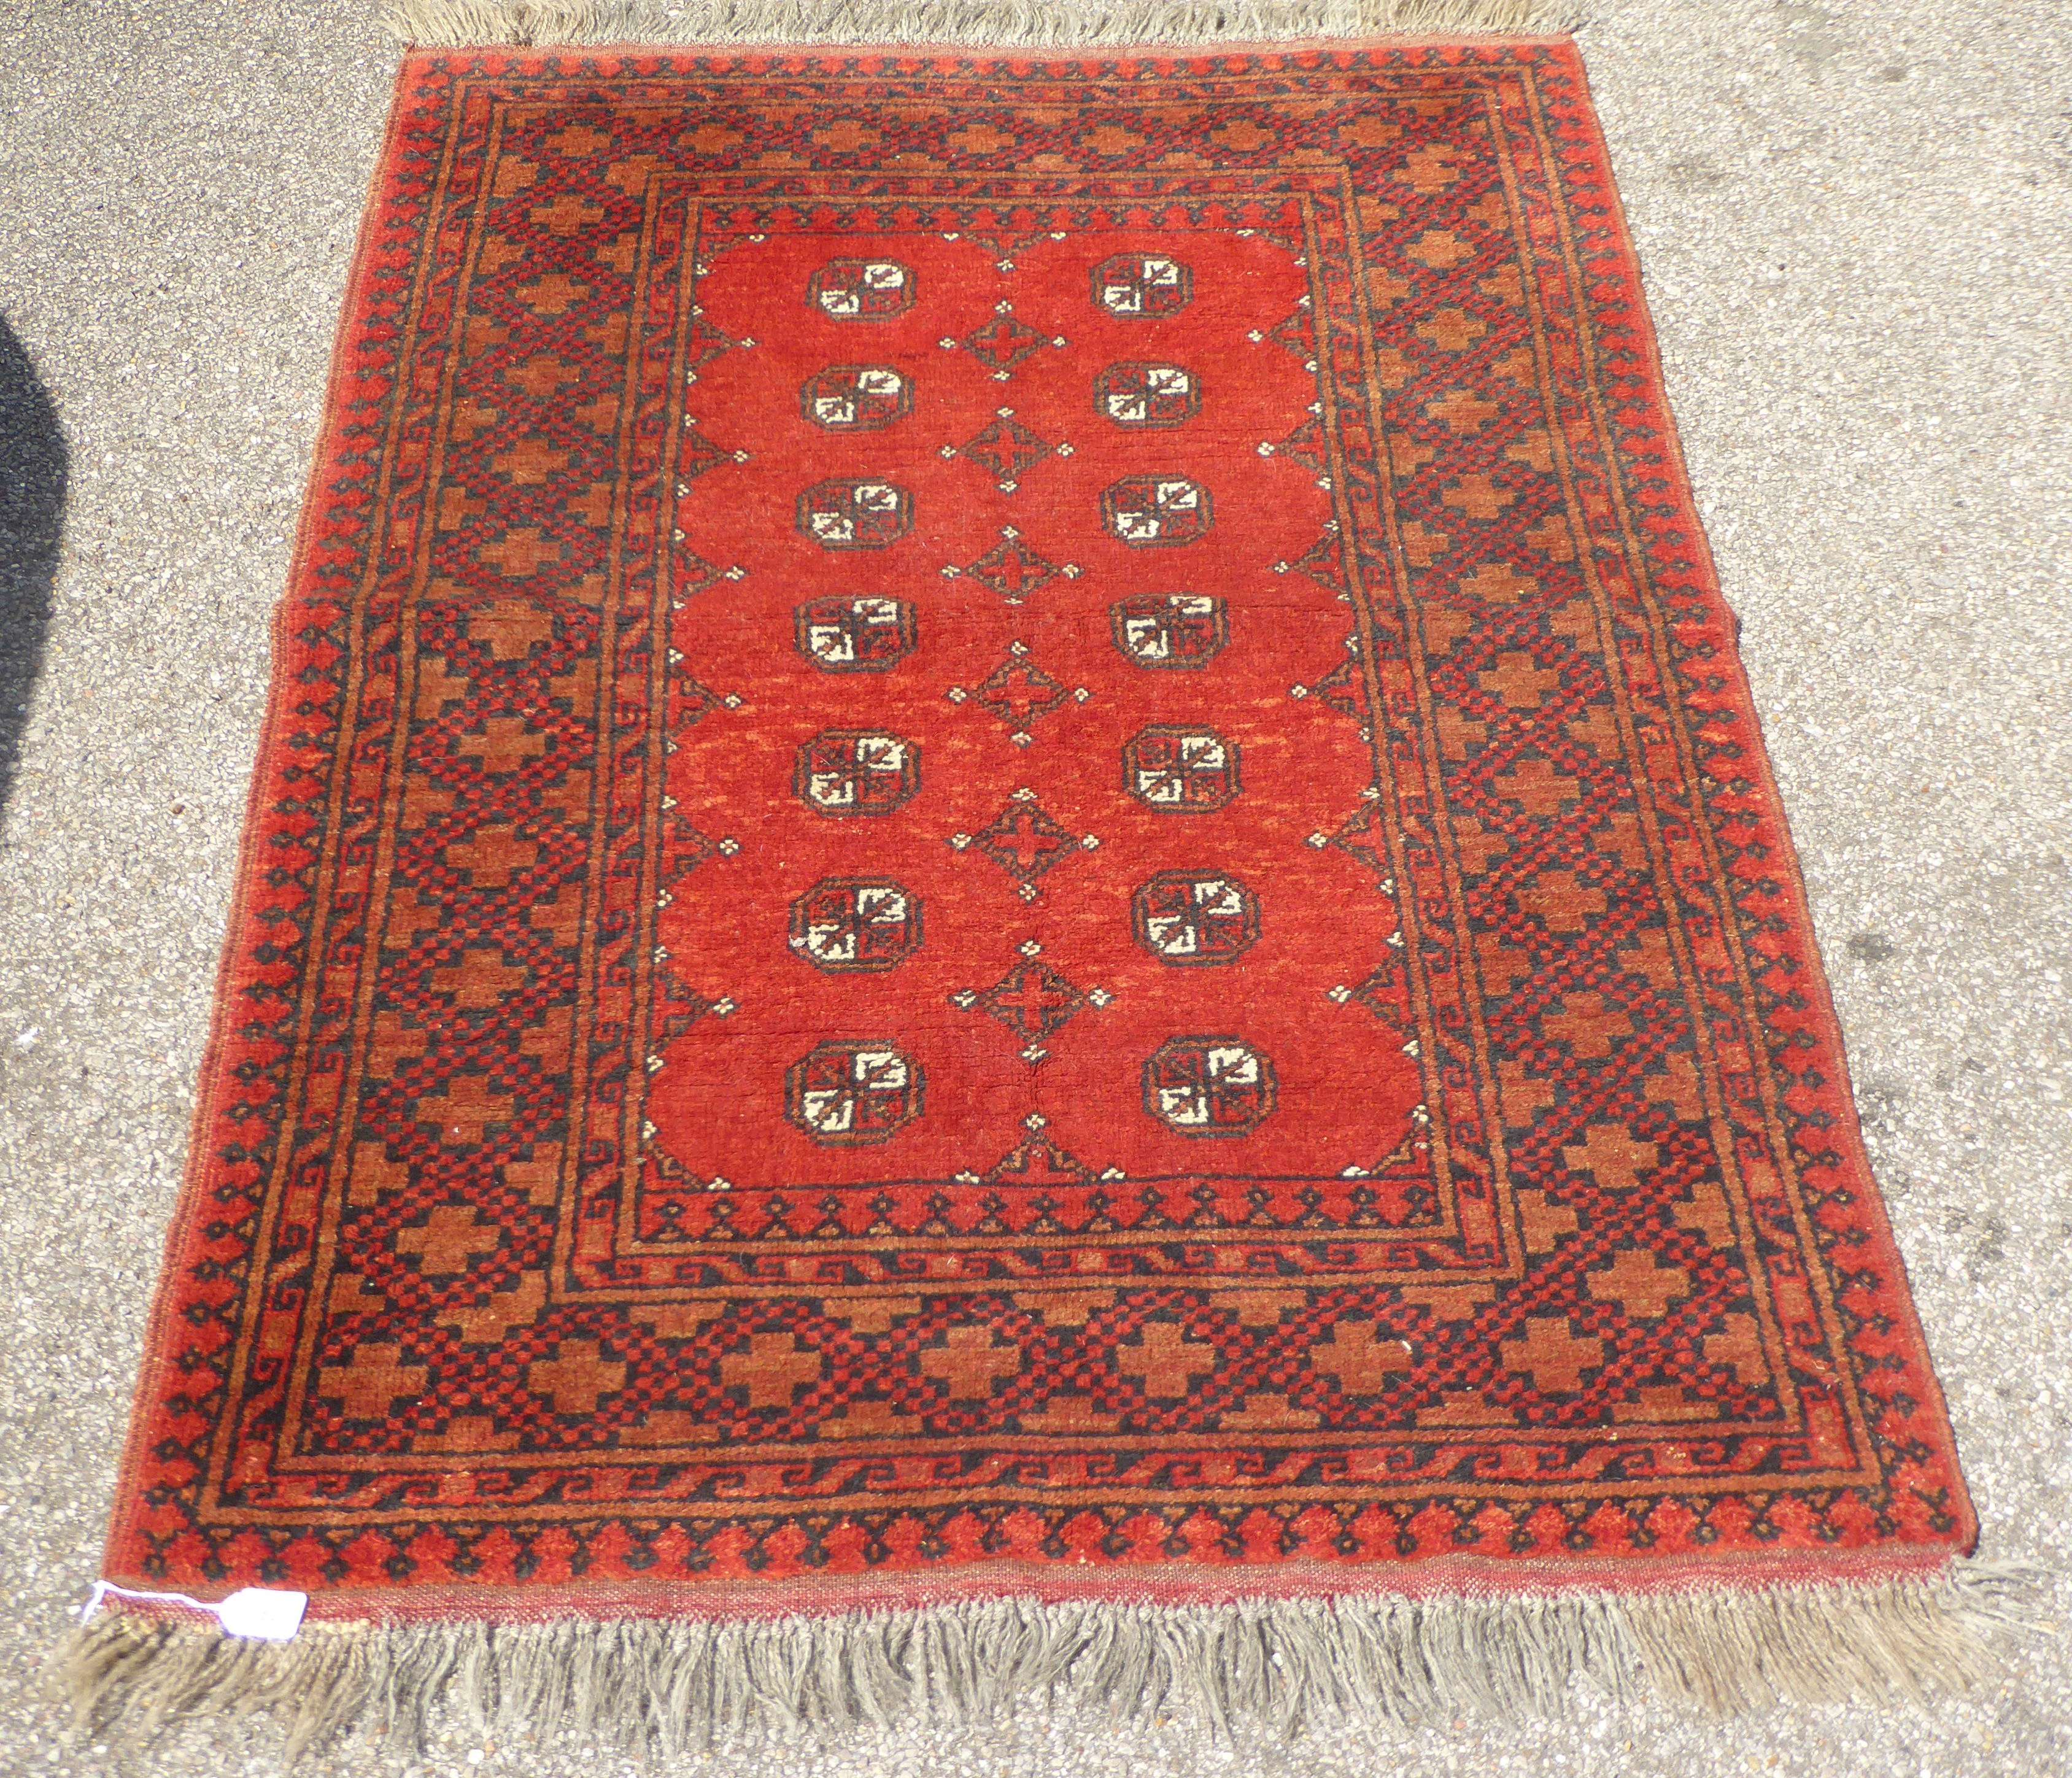 A Bokhara rug with elephant foot pattern motifs, on a terracotta ground  41" x 62"